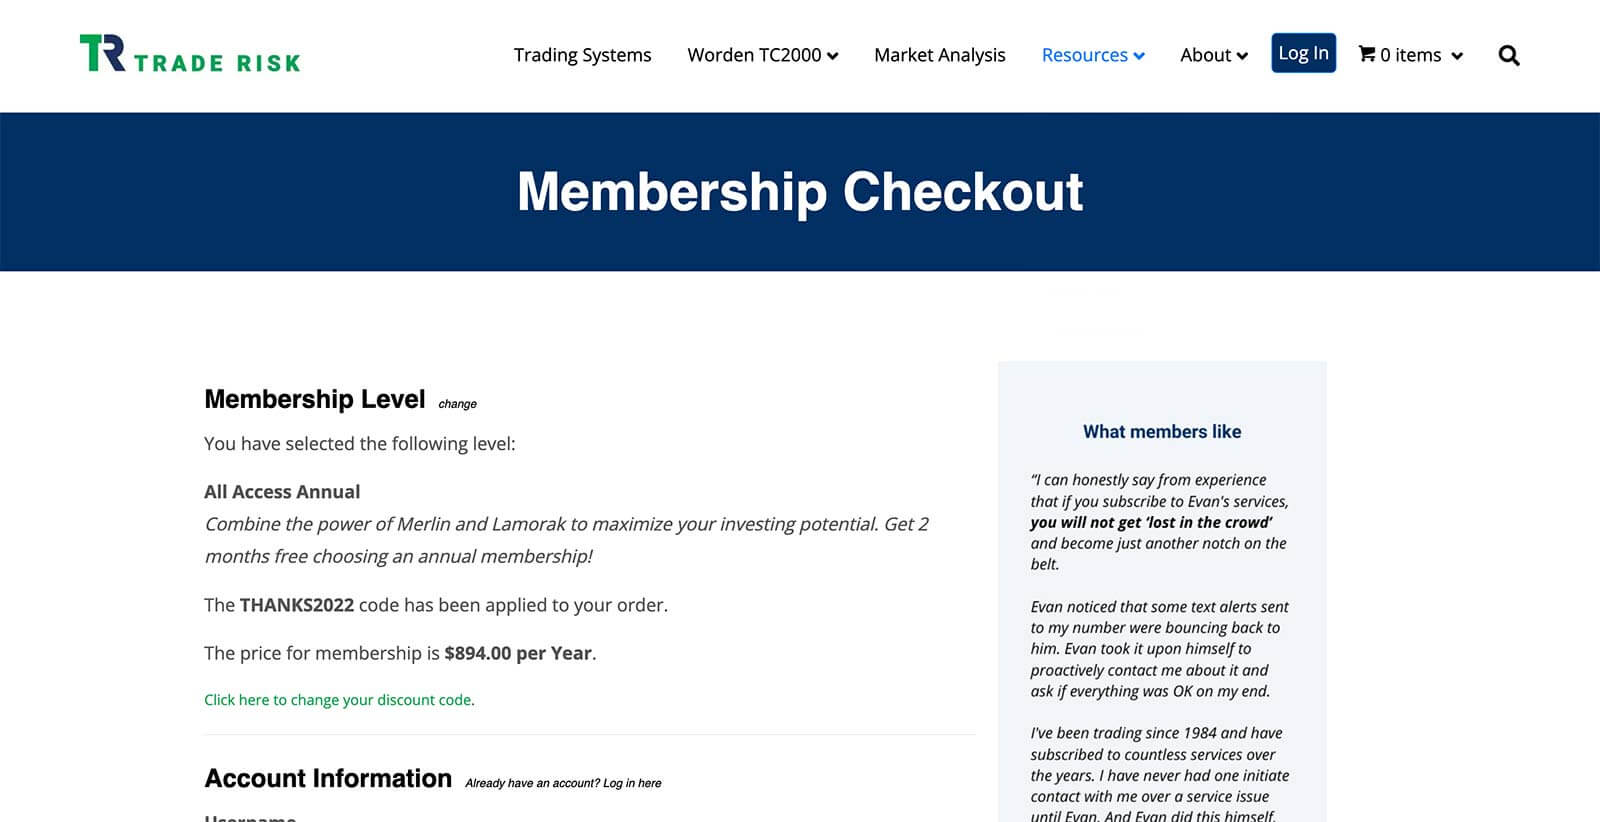 The Trade Risk Checkout Page